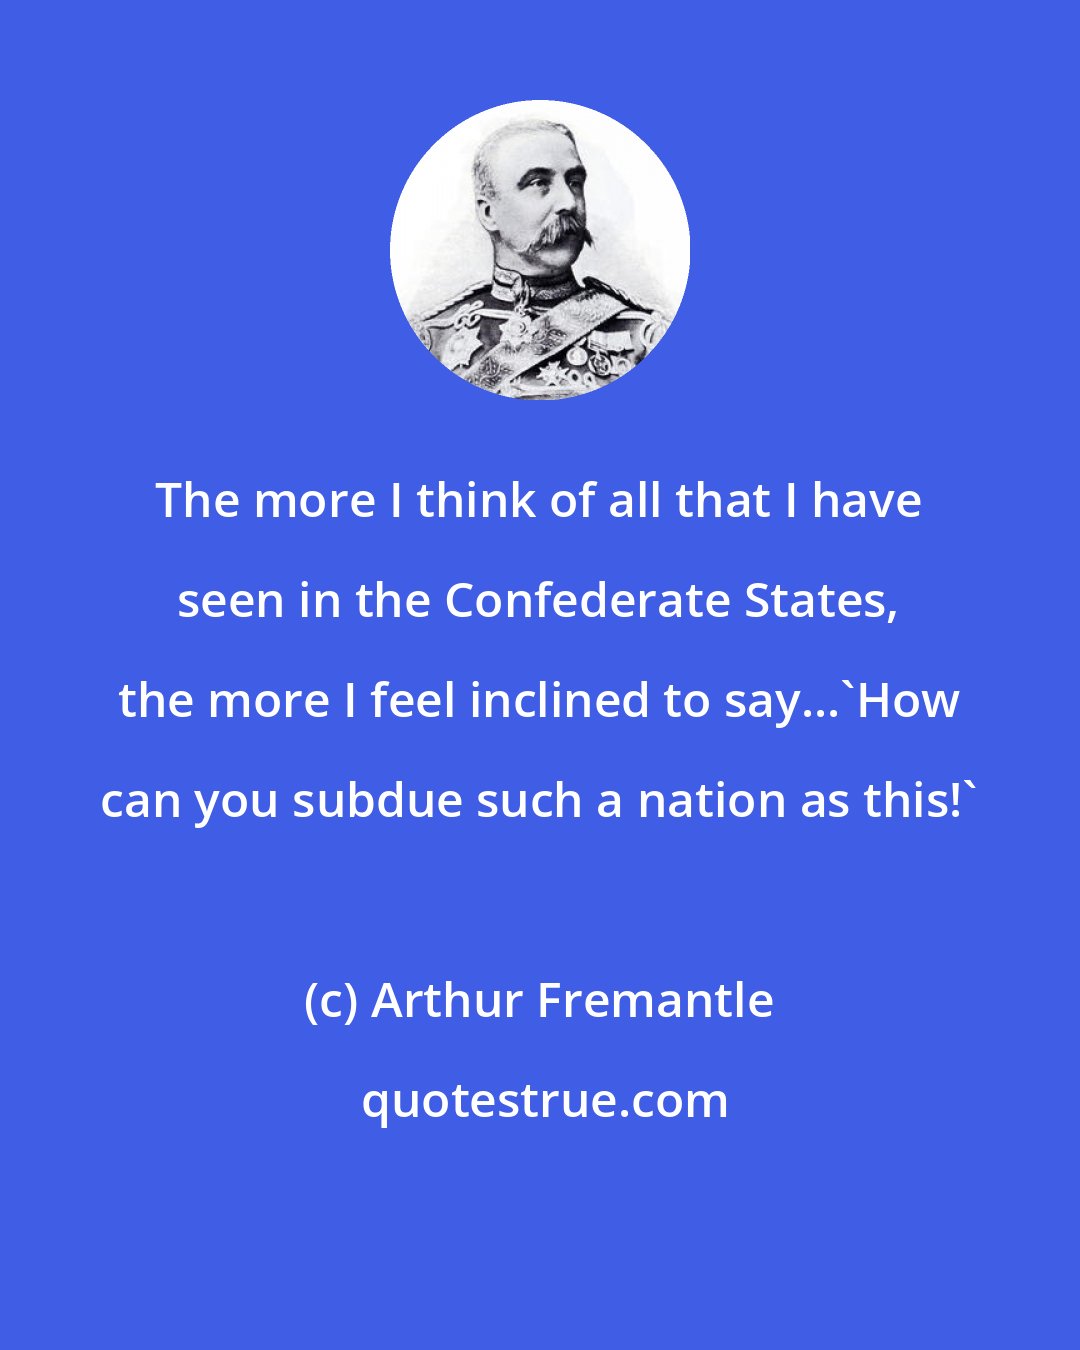 Arthur Fremantle: The more I think of all that I have seen in the Confederate States, the more I feel inclined to say...'How can you subdue such a nation as this!'